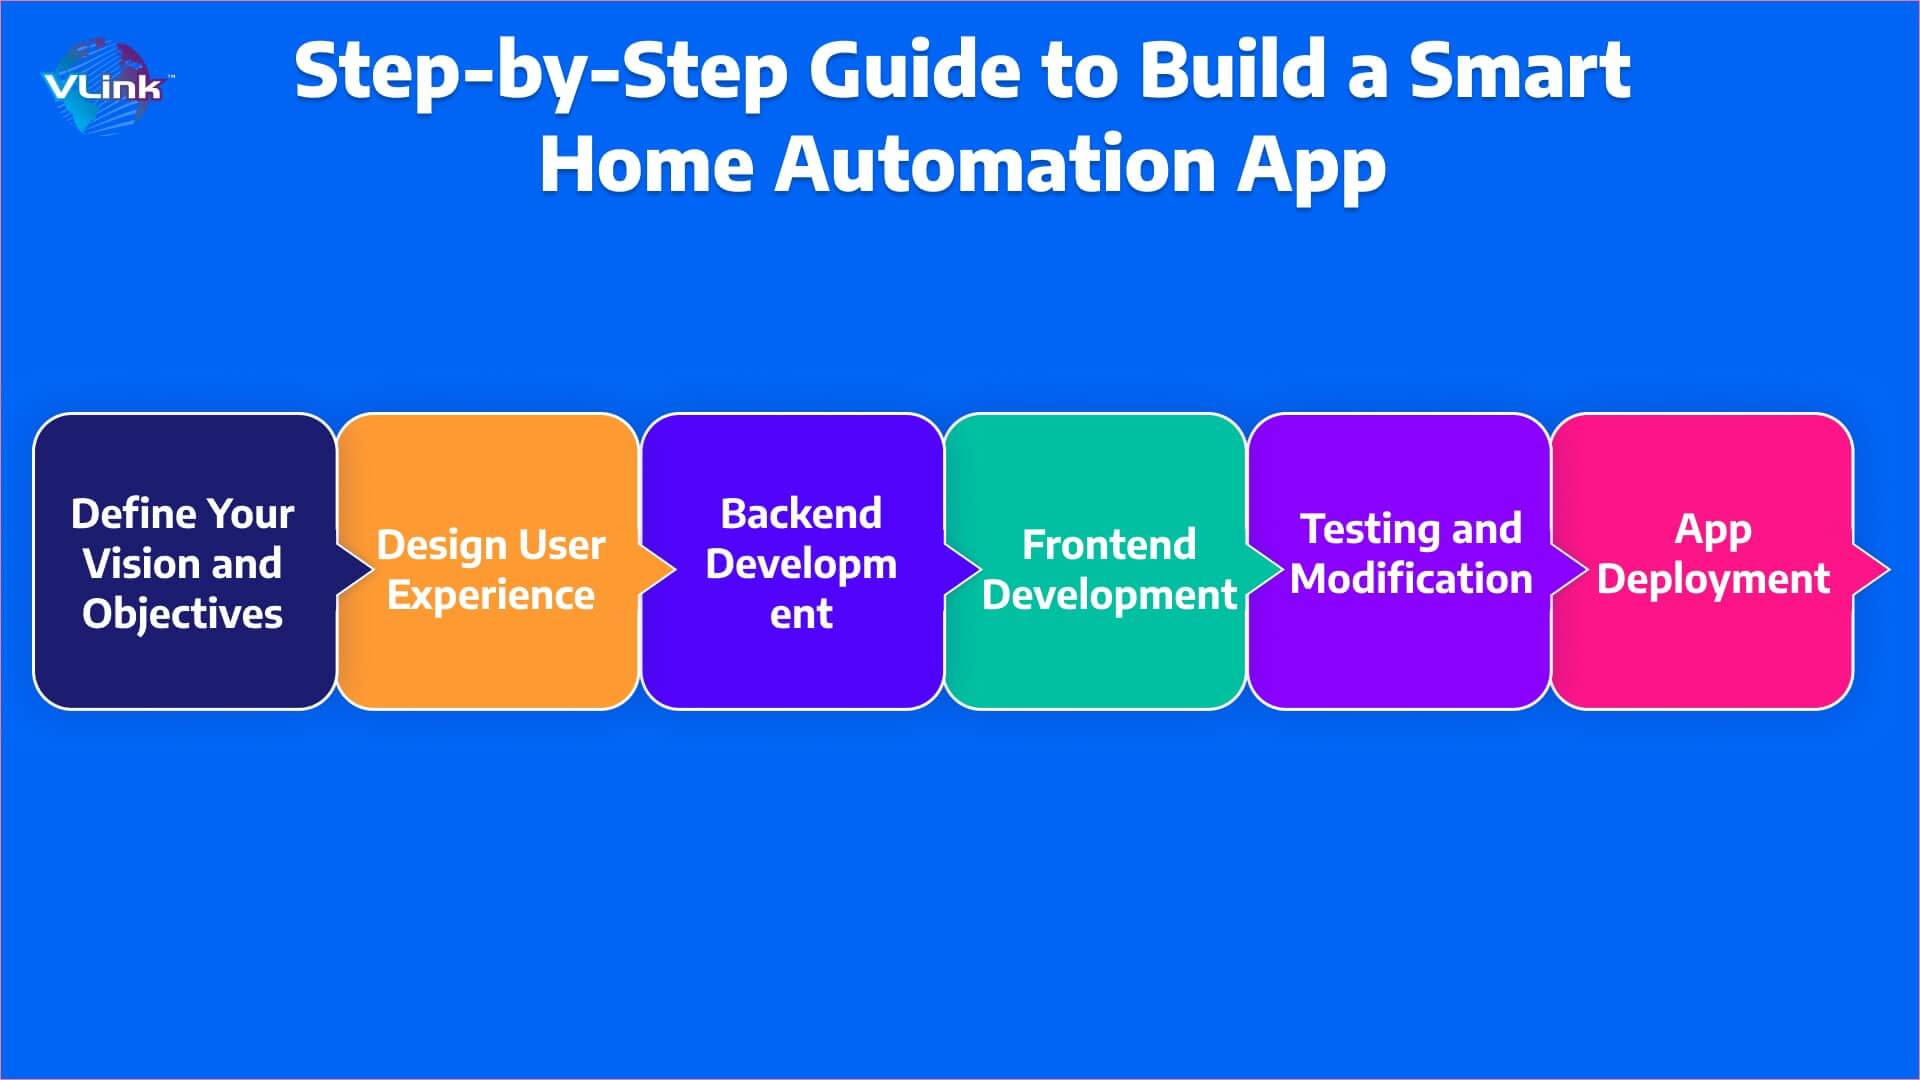 Step-by-Step Guide to Build a Smart Home Automation App